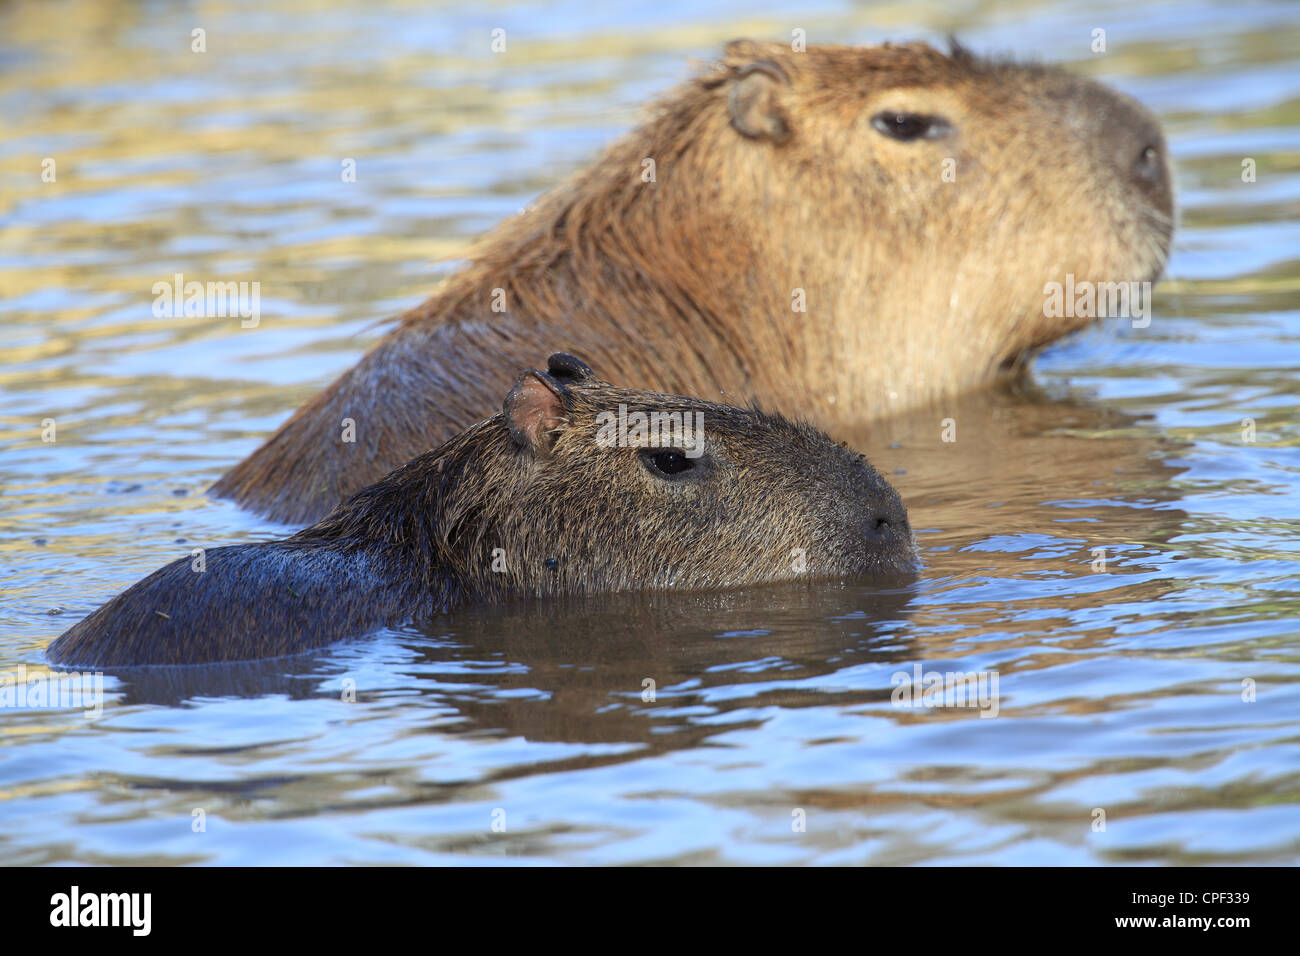 capybara (Hydrochoerus hydrochaeris) is the largest extant rodent in the world. Its closest relatives are agouti, chinchillas, Stock Photo